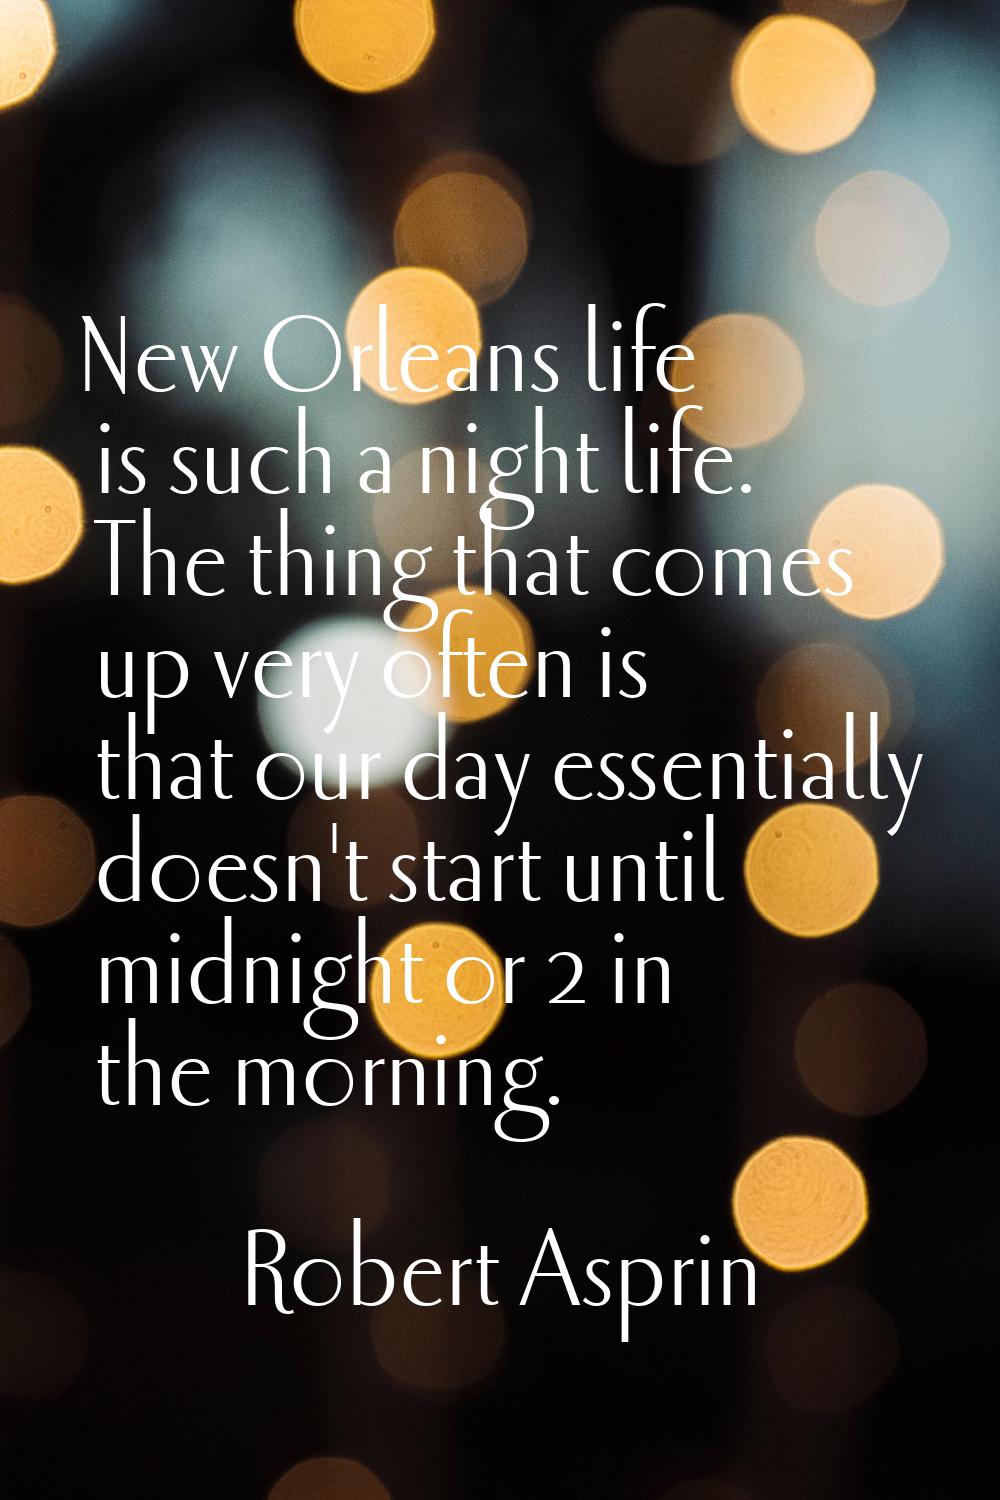 New Orleans life is such a night life. The thing that comes up very often is that our day essential